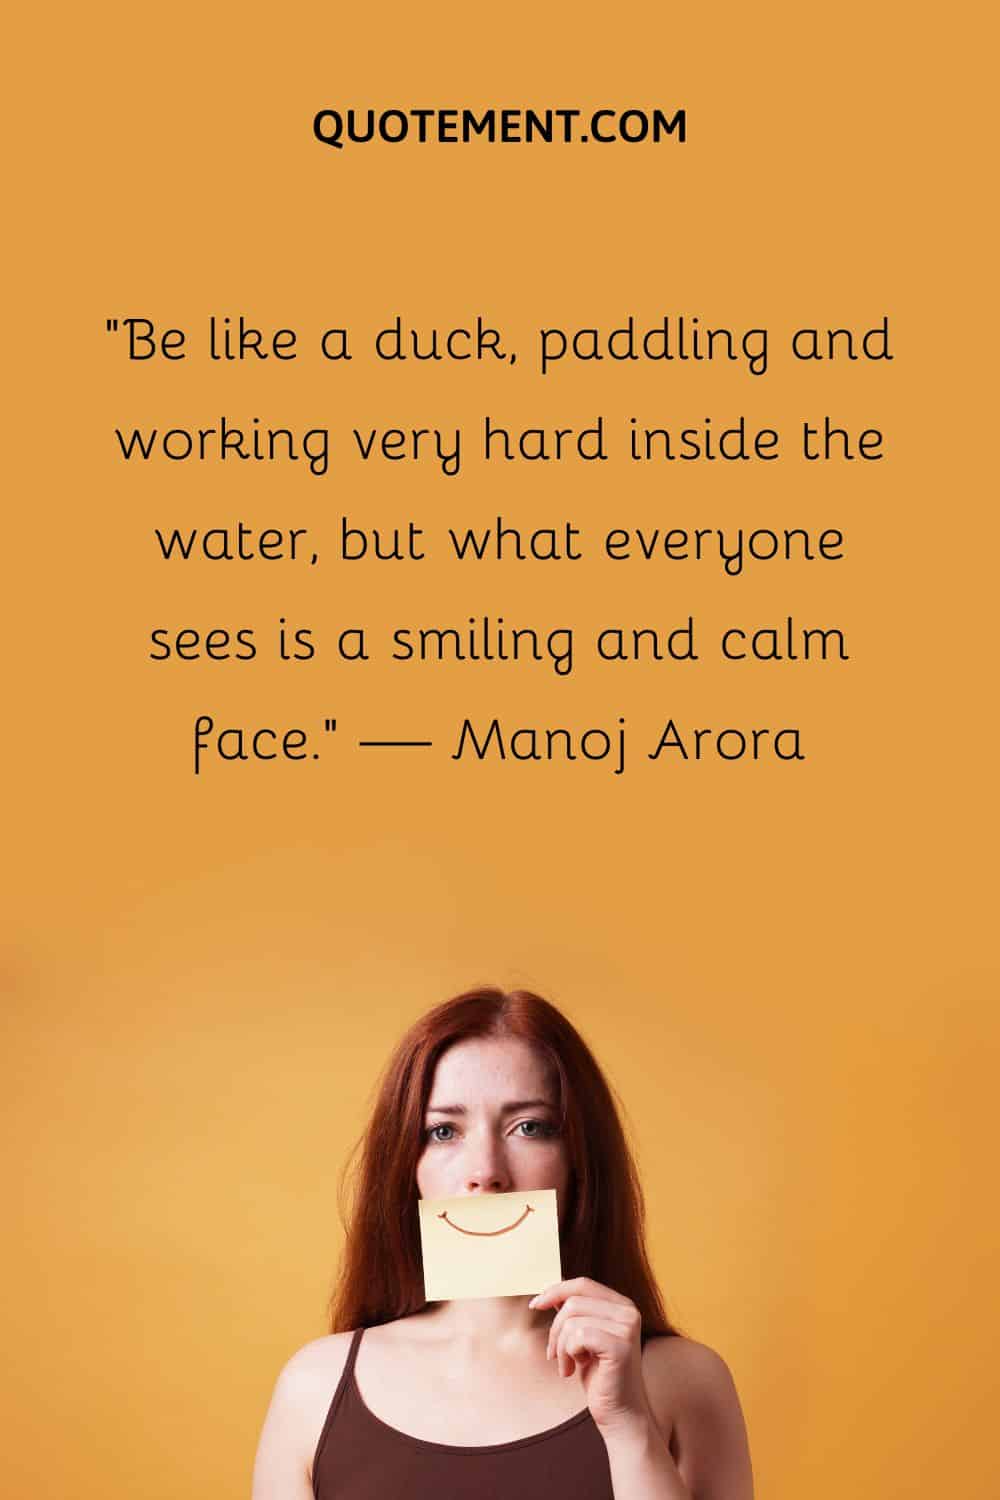 Be like a duck, paddling and working very hard inside the water